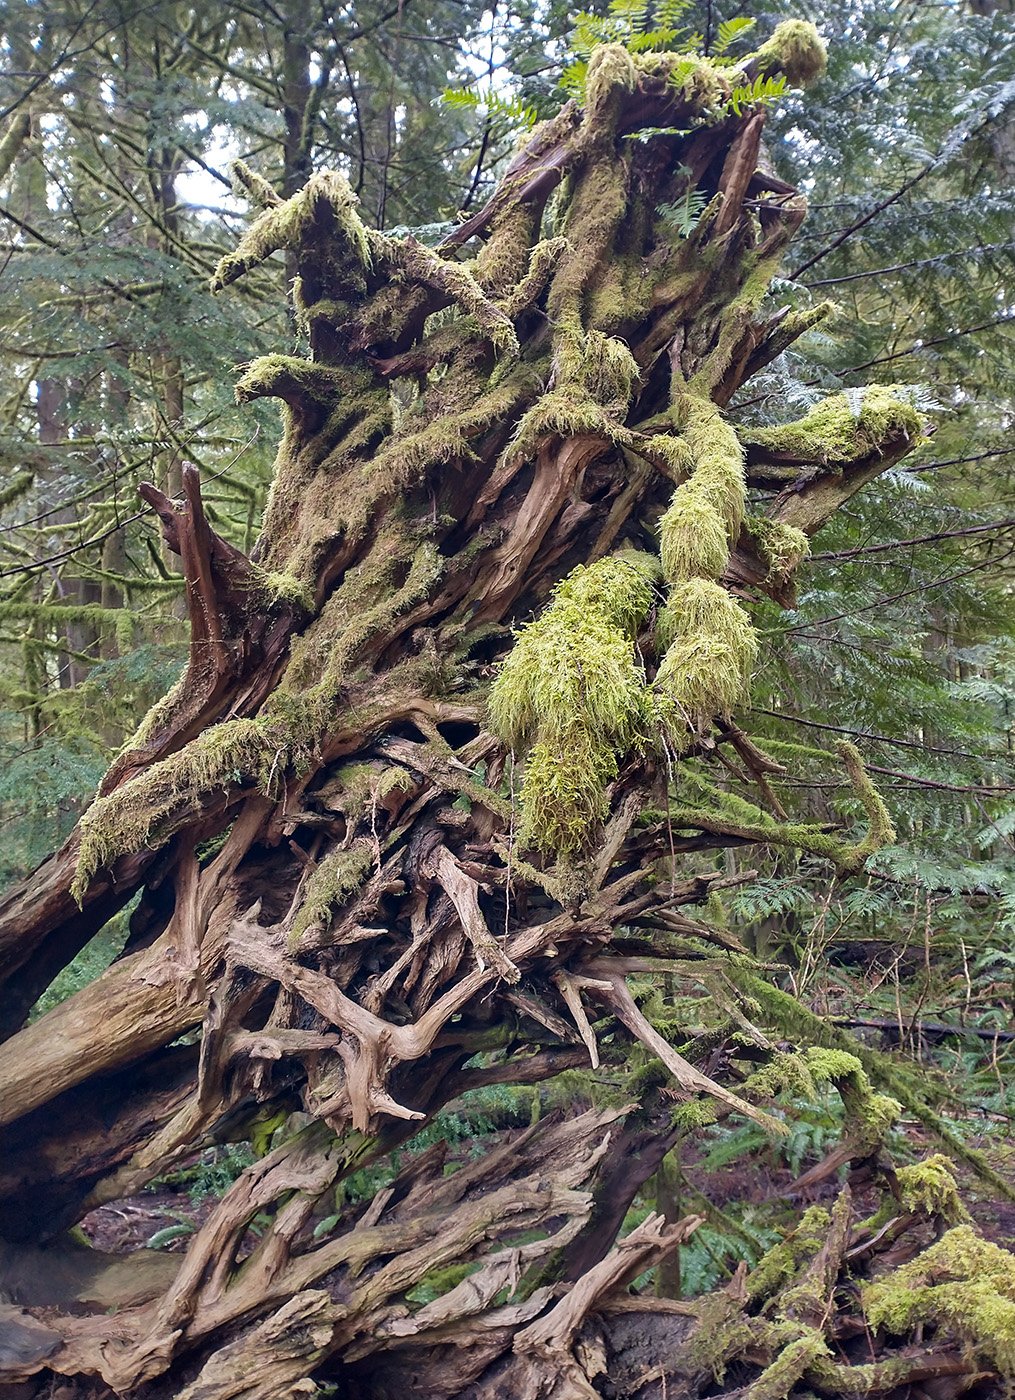  There’s many large fallen redwoods with all sorts of moss growing on them. Moss is also a big theme on Vancouver island. Everything’s covered in moss. 